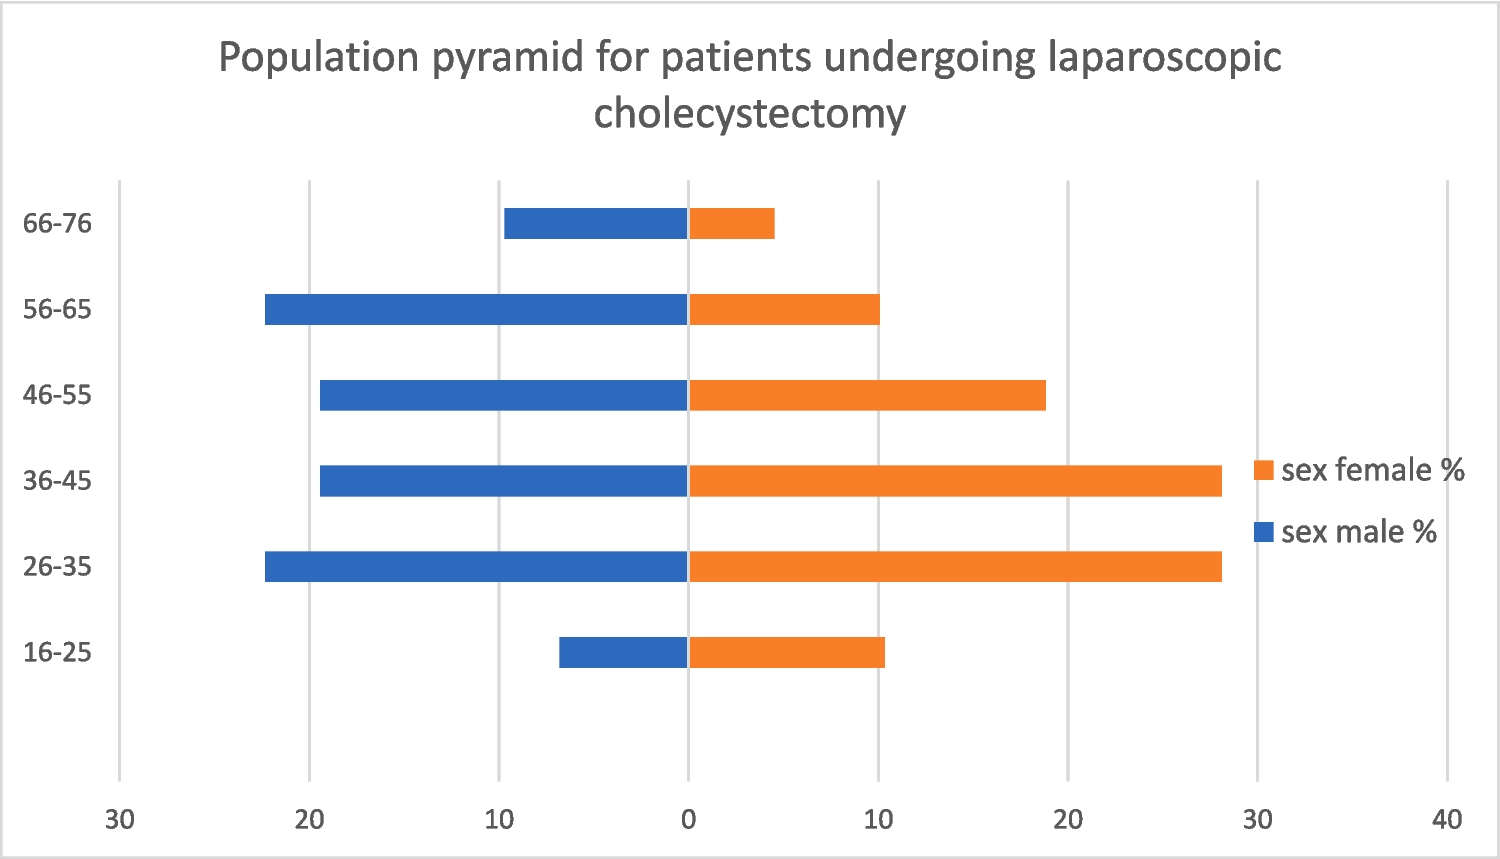 A Randomised Controlled Study to Reduce the Incidence of Umbilical Port Site Complications in Laparoscopic Cholecystectomy Using Uniform Methods of Umbilical Hygiene